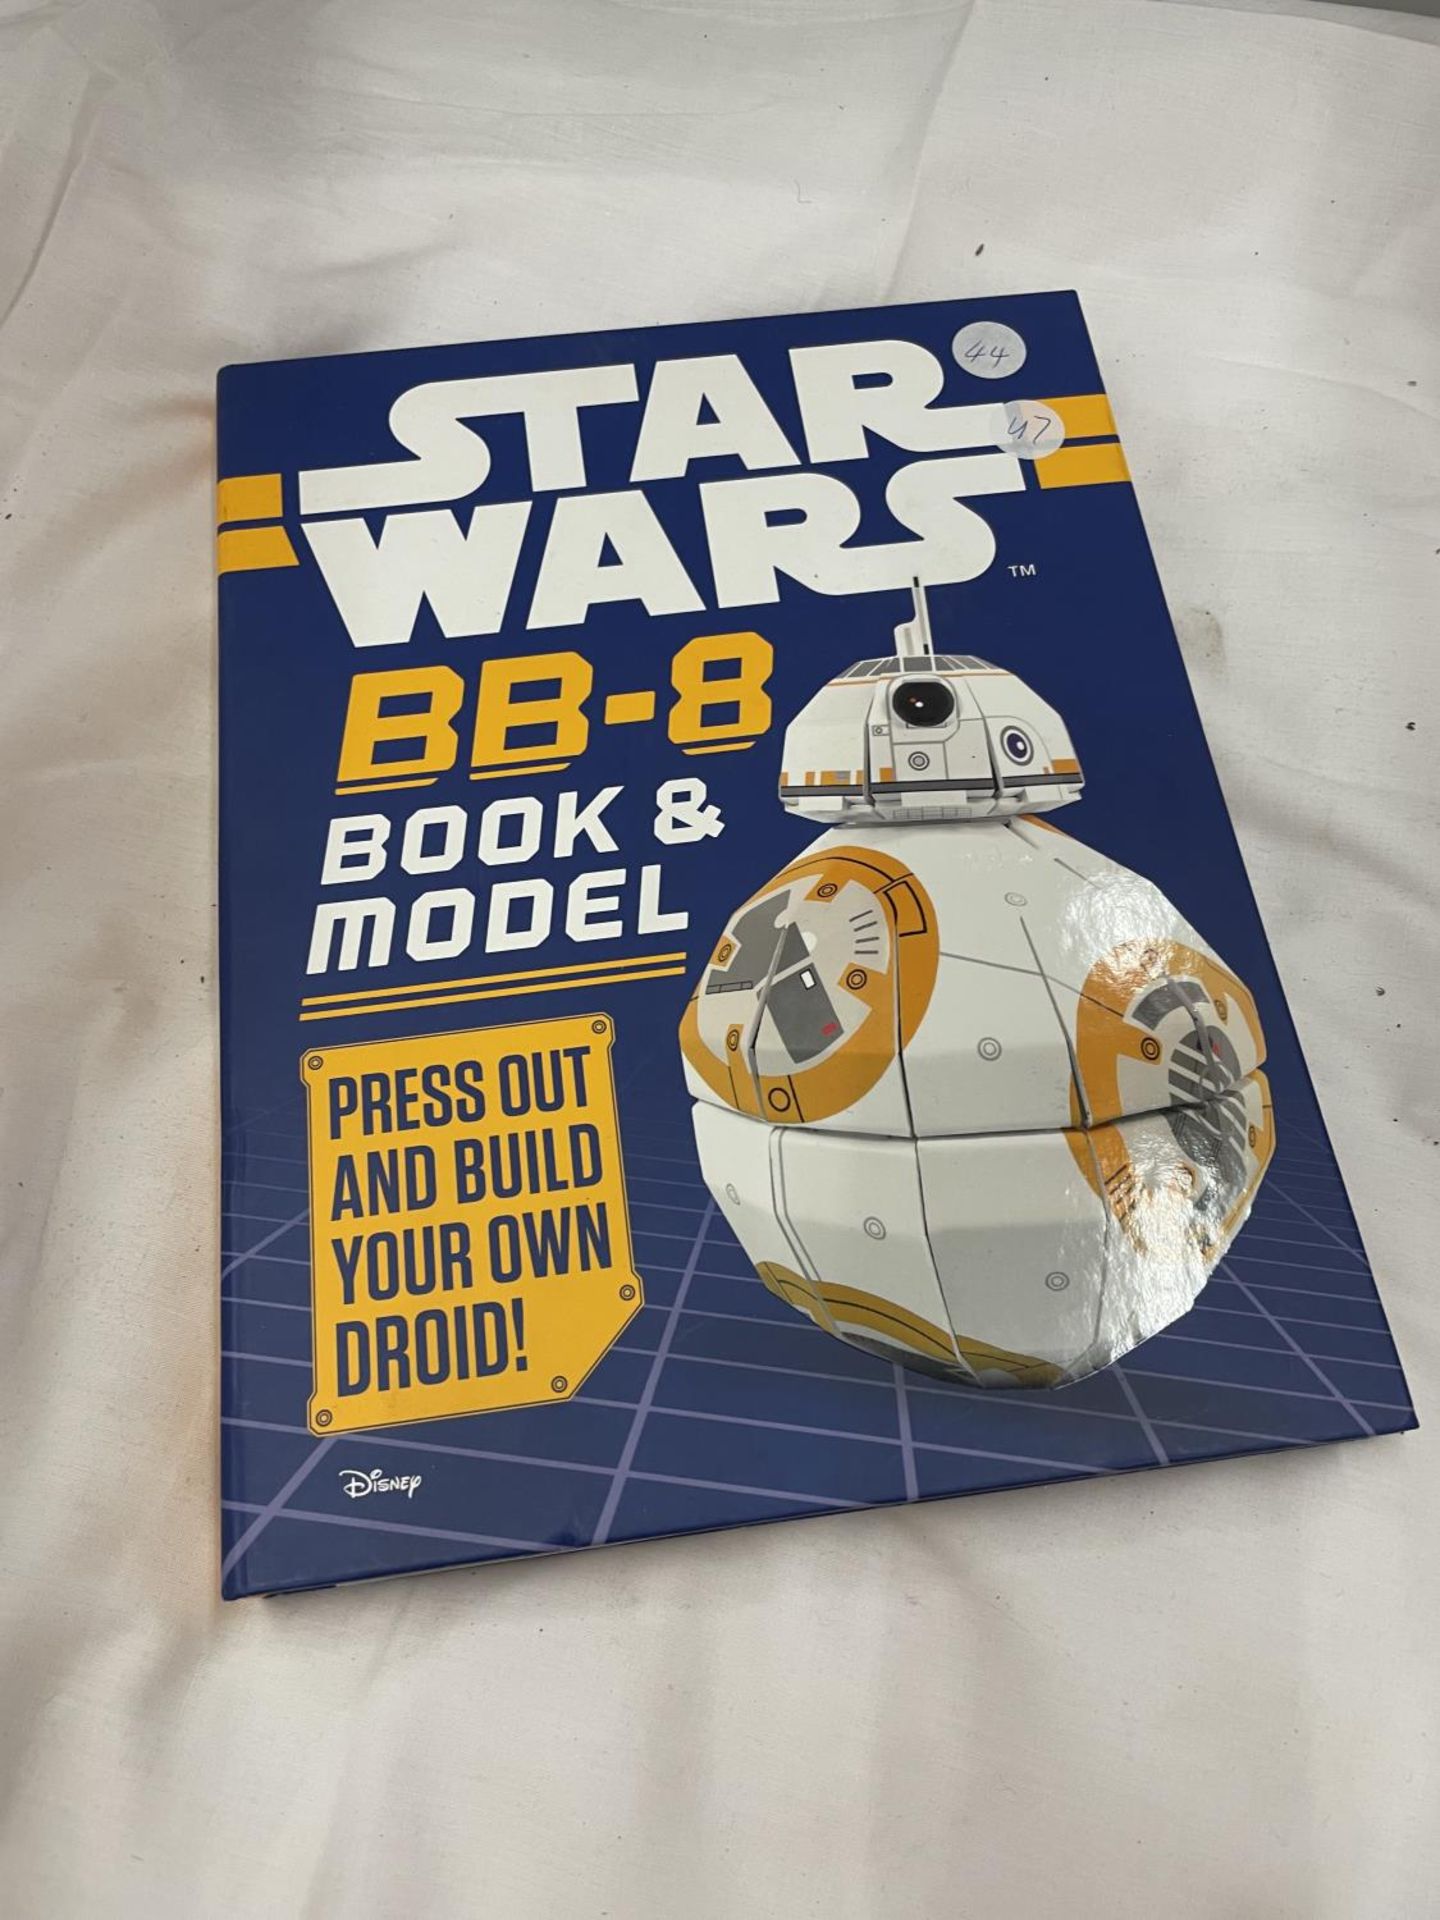 A STAR WARS BB-8 BOOK AND MODEL